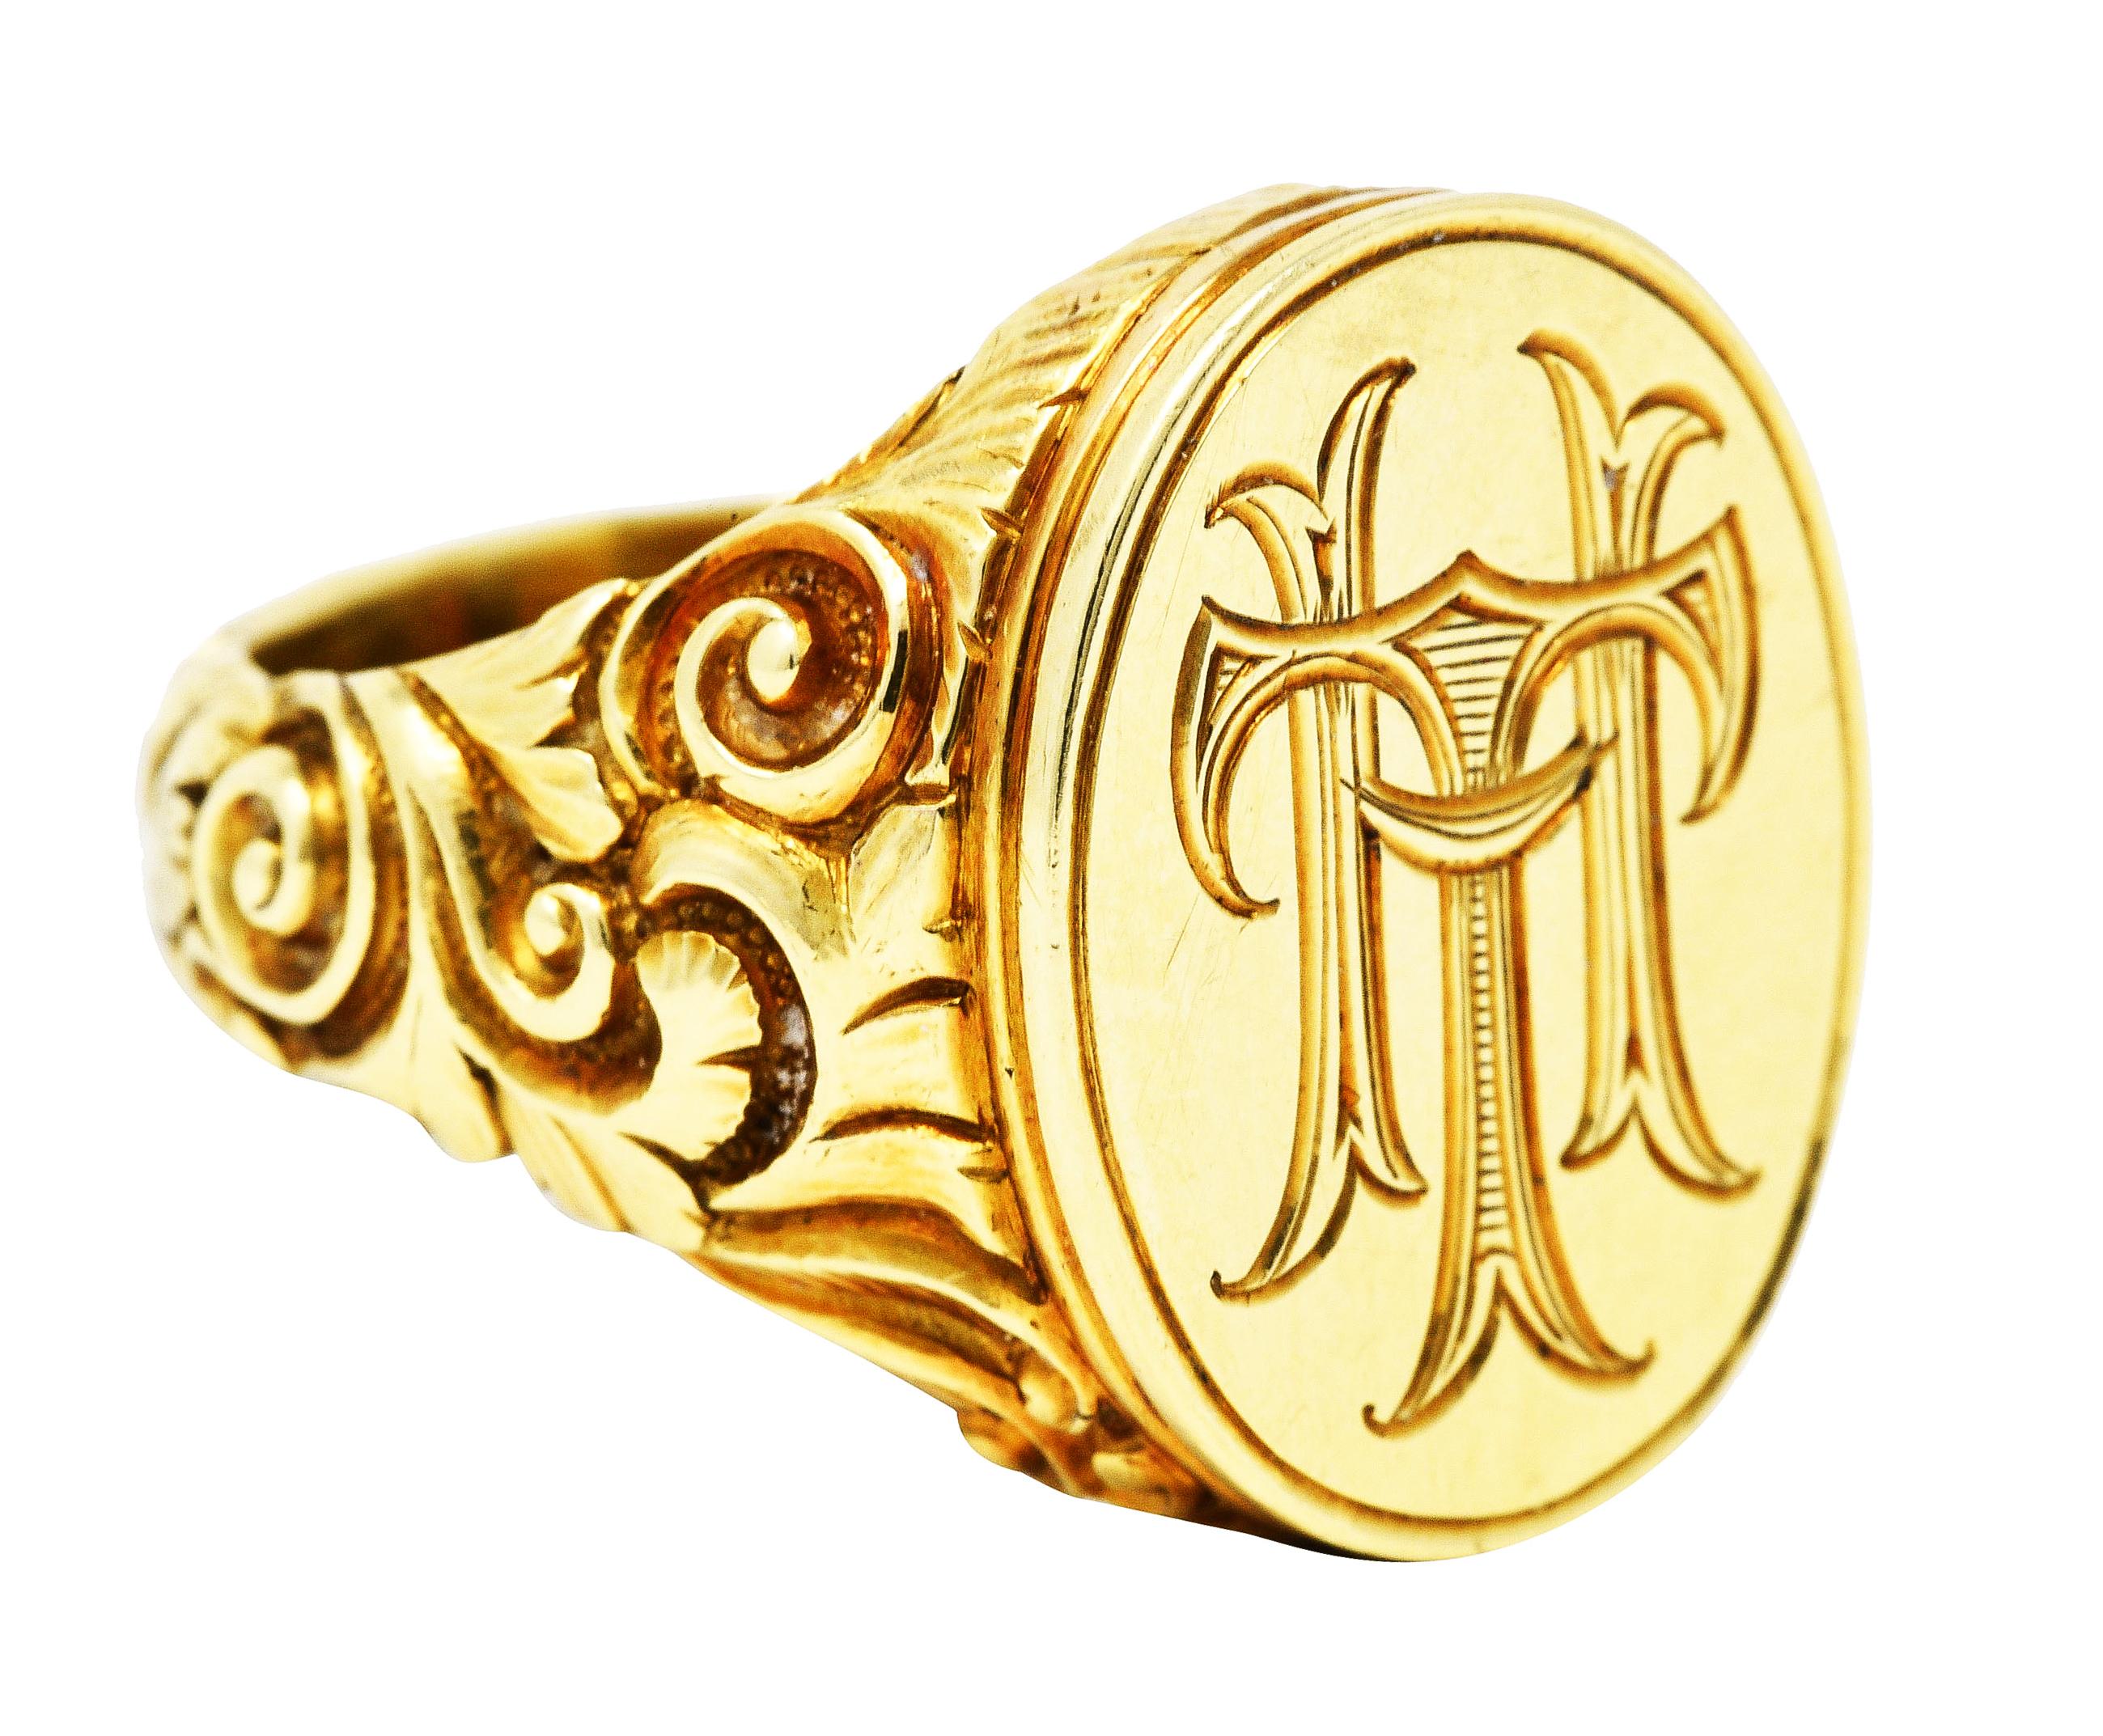 Ring features flat oval signet face with stylized monogram engraving

Featuring deeply grooved scroll motif extending from shoulders down shank

Stamped 585 for 14 karat gold

With maker's mark for Scofield & Co.

Circa: 1905

Ring size: 9 1/2